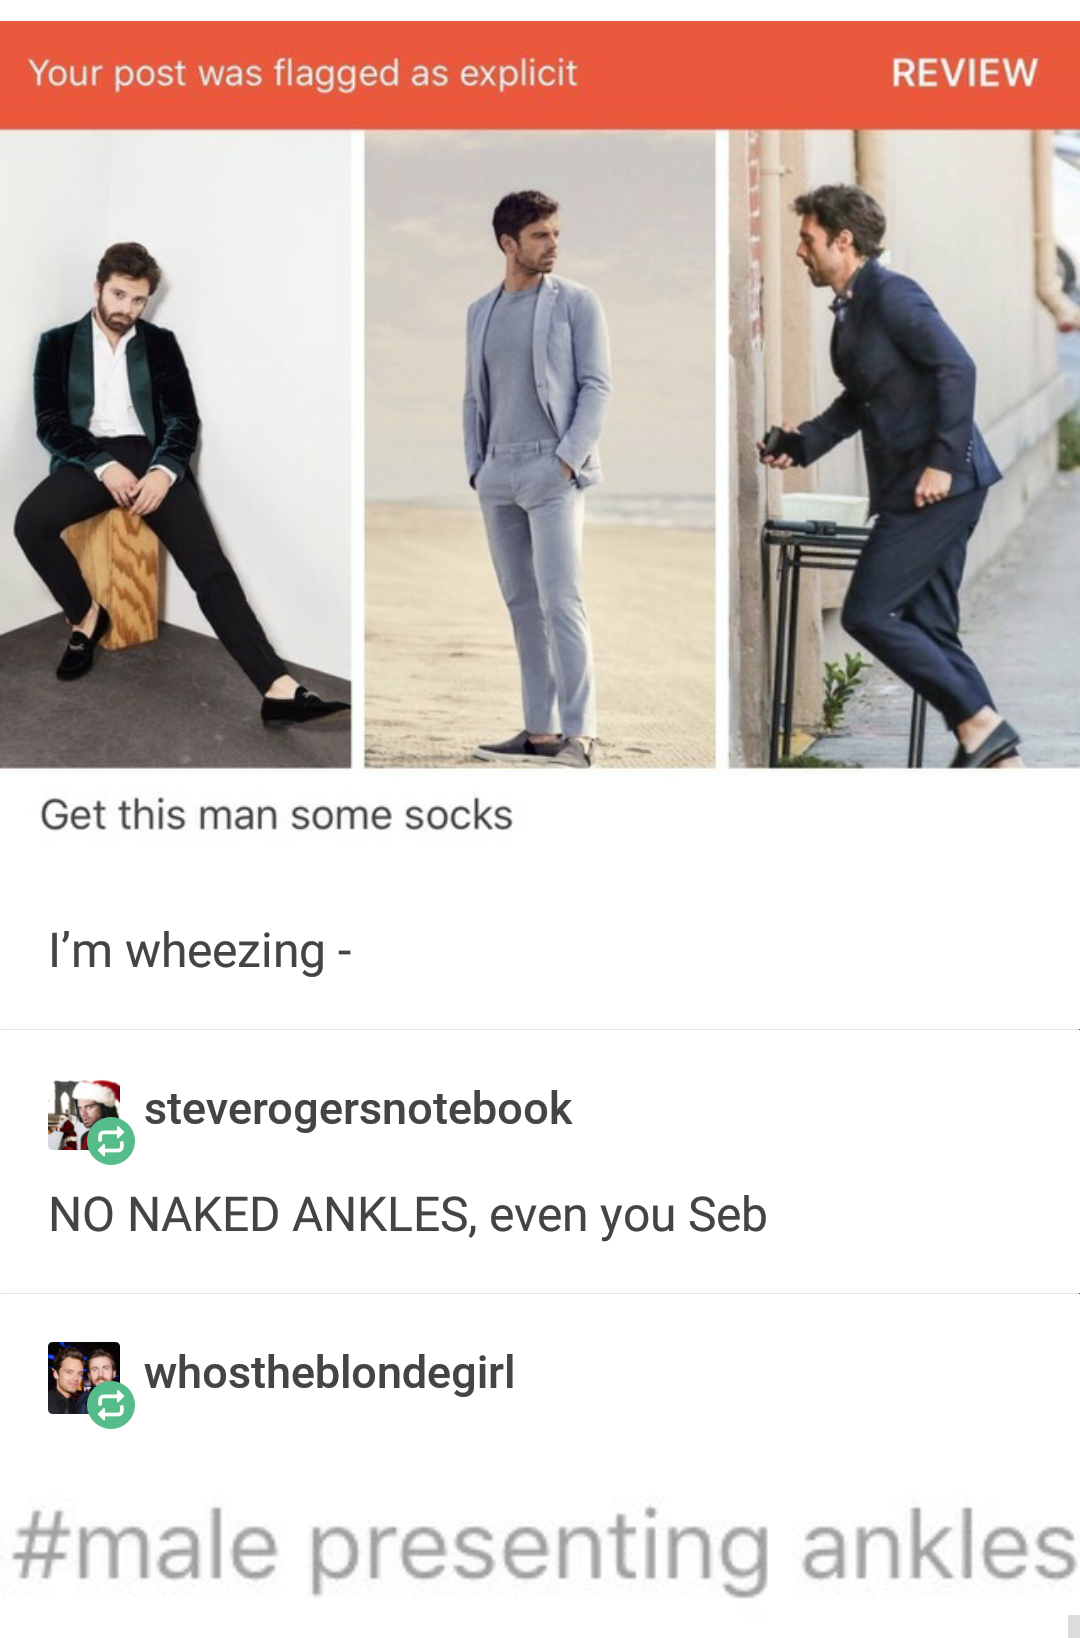 The+ankles+are+coming.